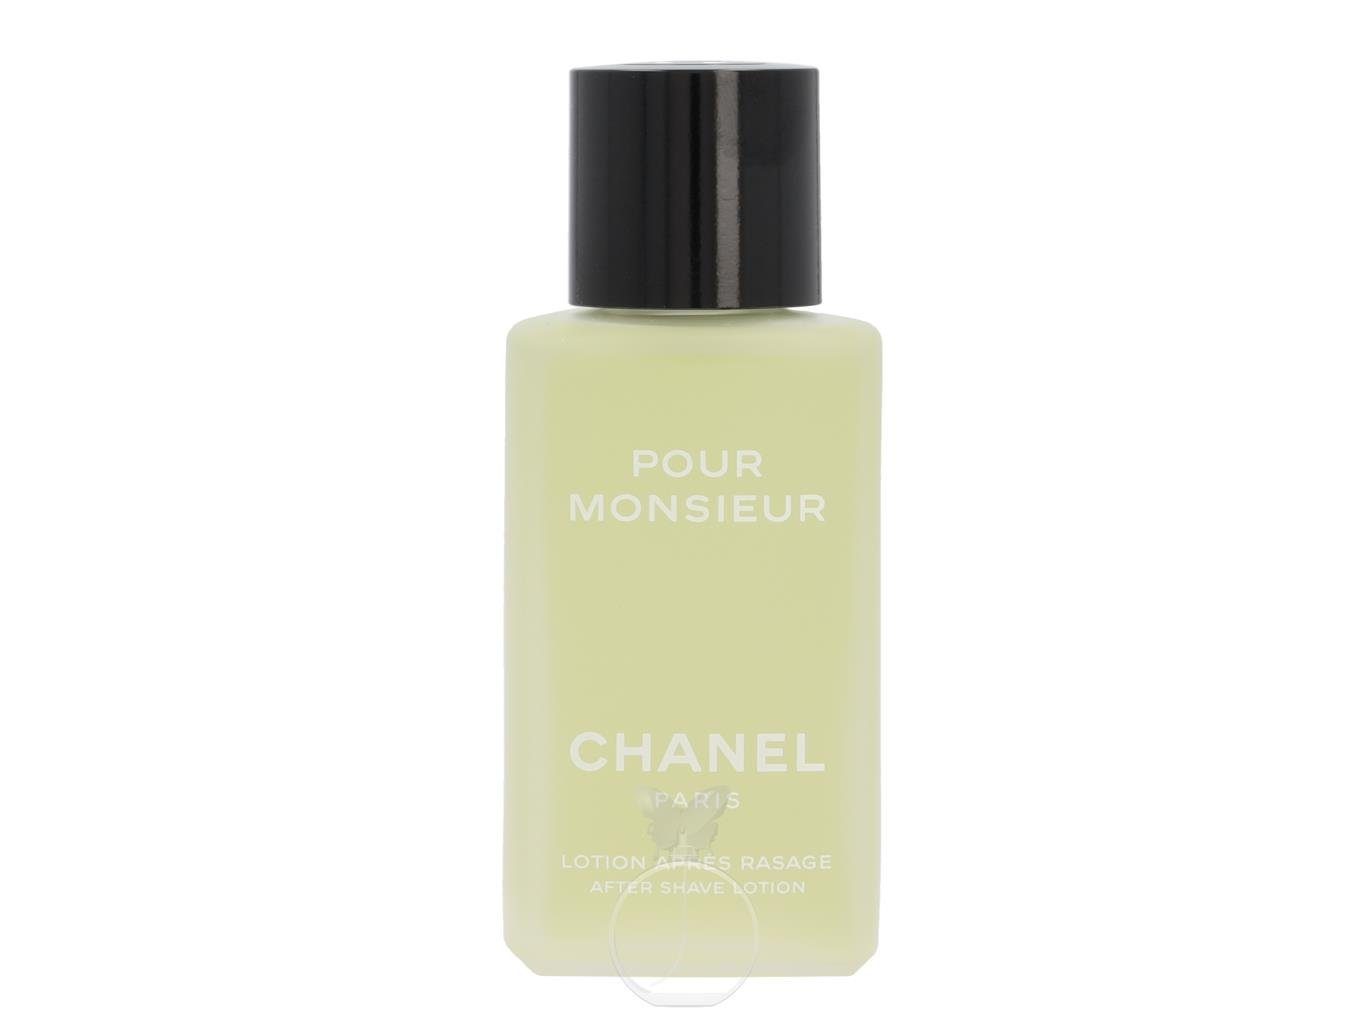 CHANEL After Shave Lotion Shave Monsieur Chanel 100 ml Pour Lotion Packung After